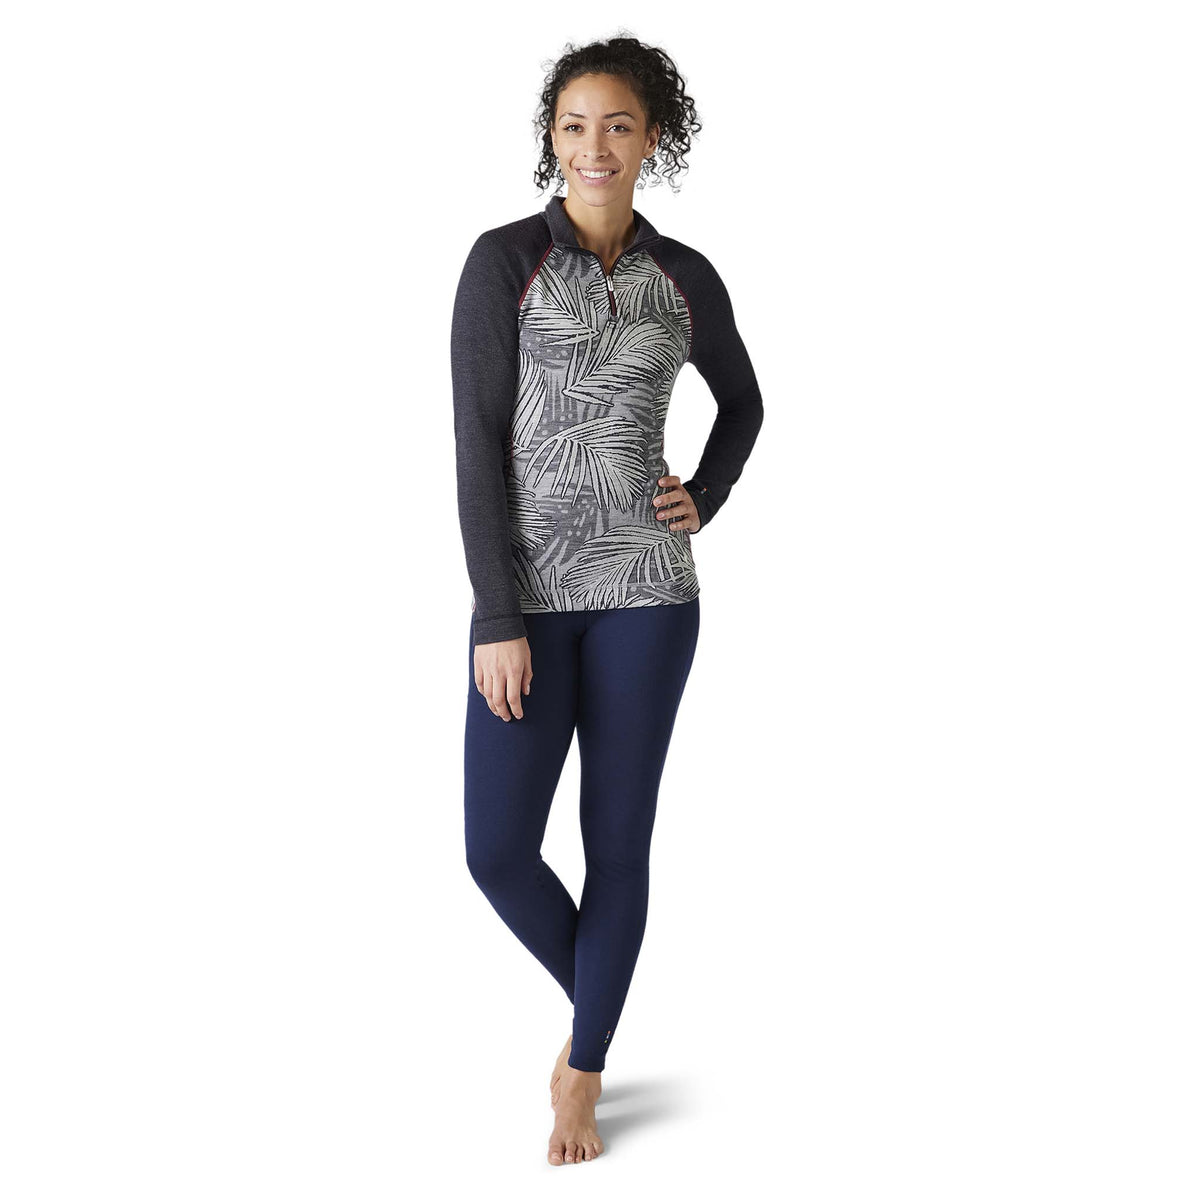 Smartwool Merino 250 baselayer manches longues light gray palm femme face